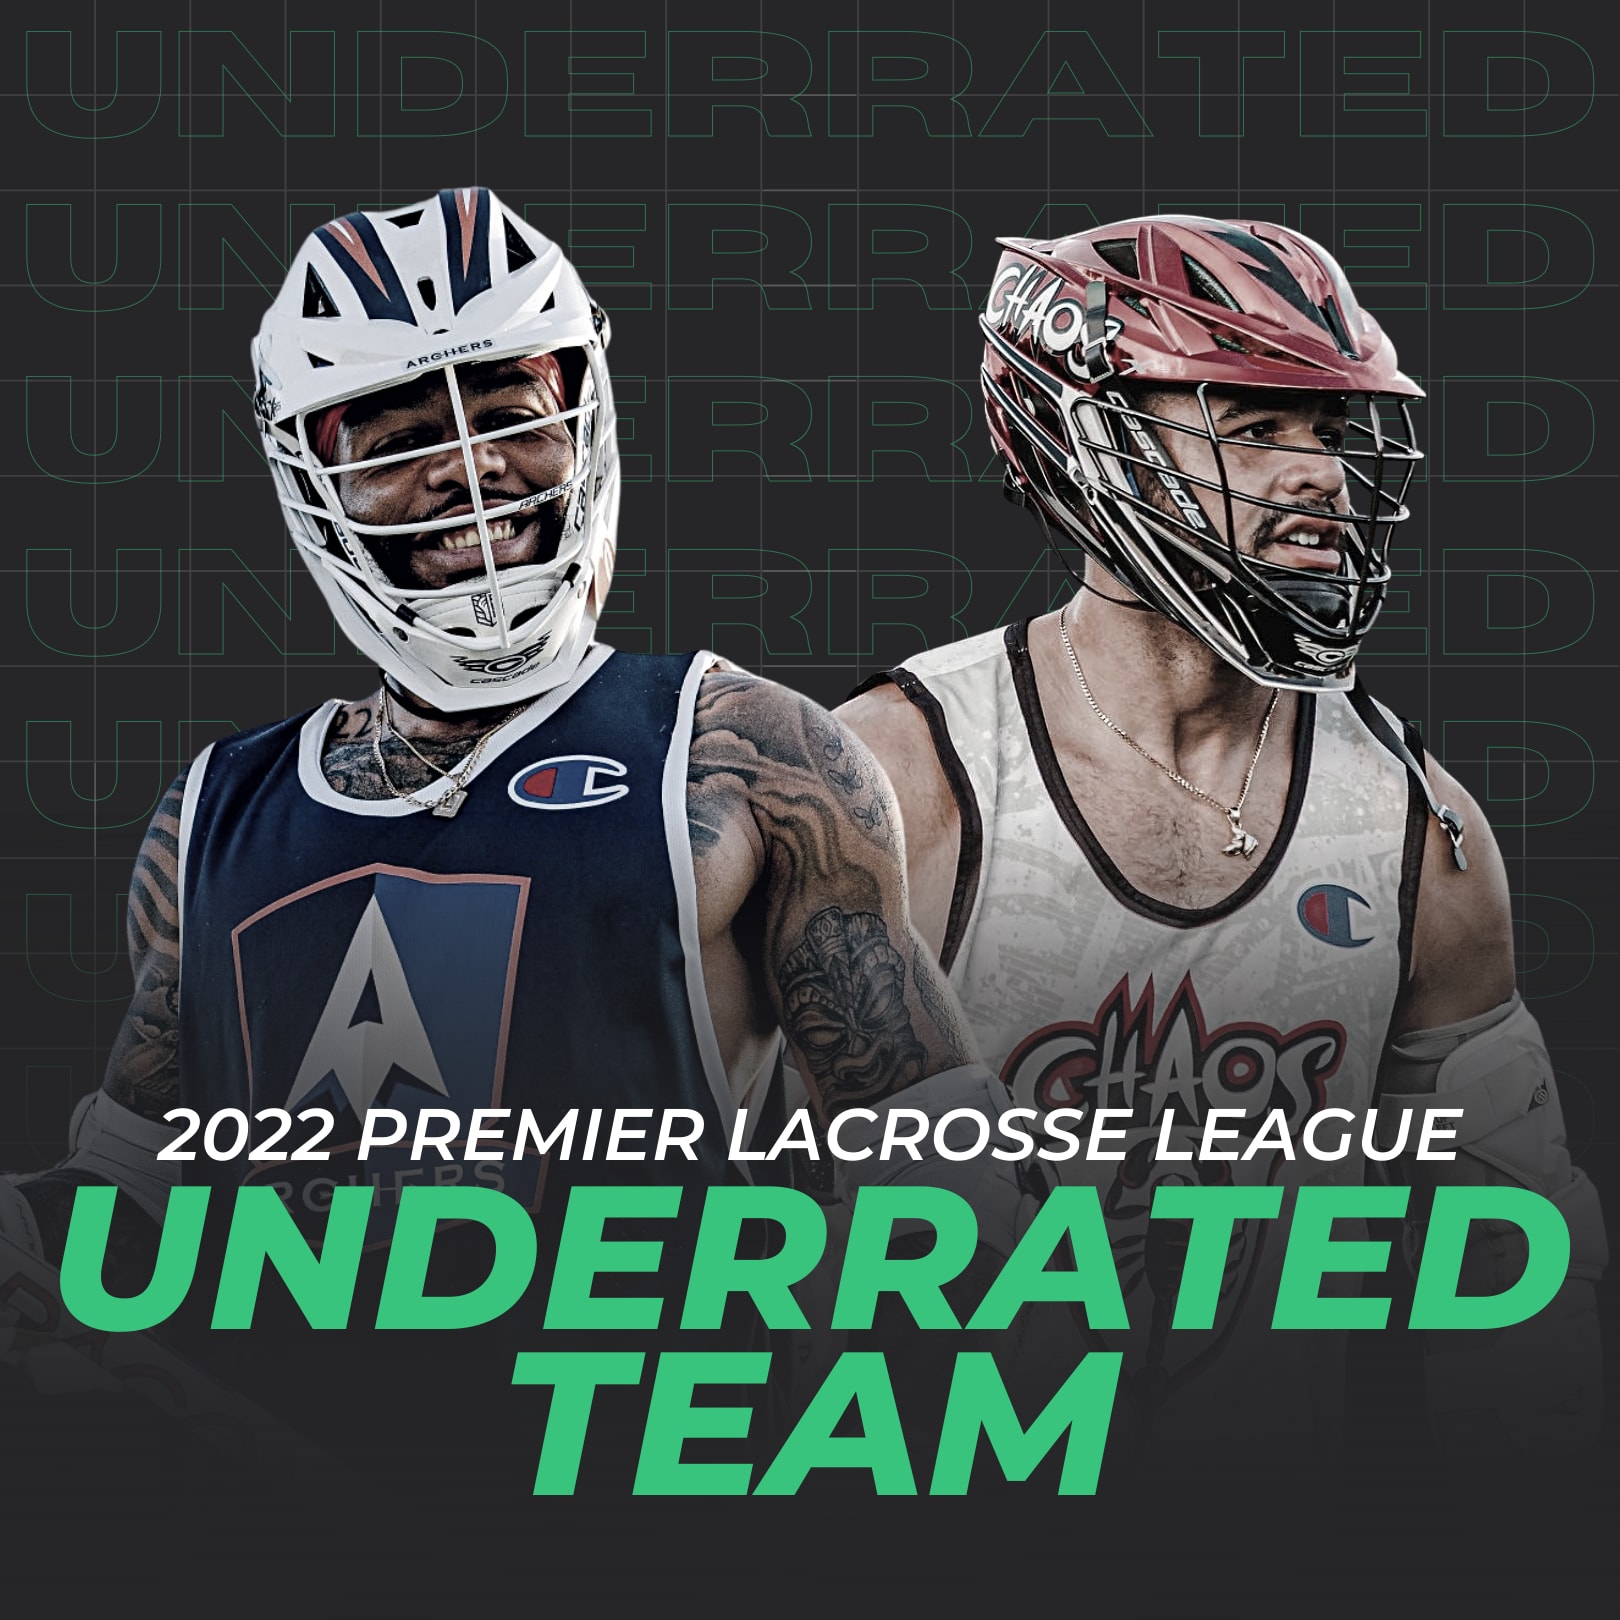 THE 8TH TEAM IN THE PLL  Cannons Lacrosse Club 